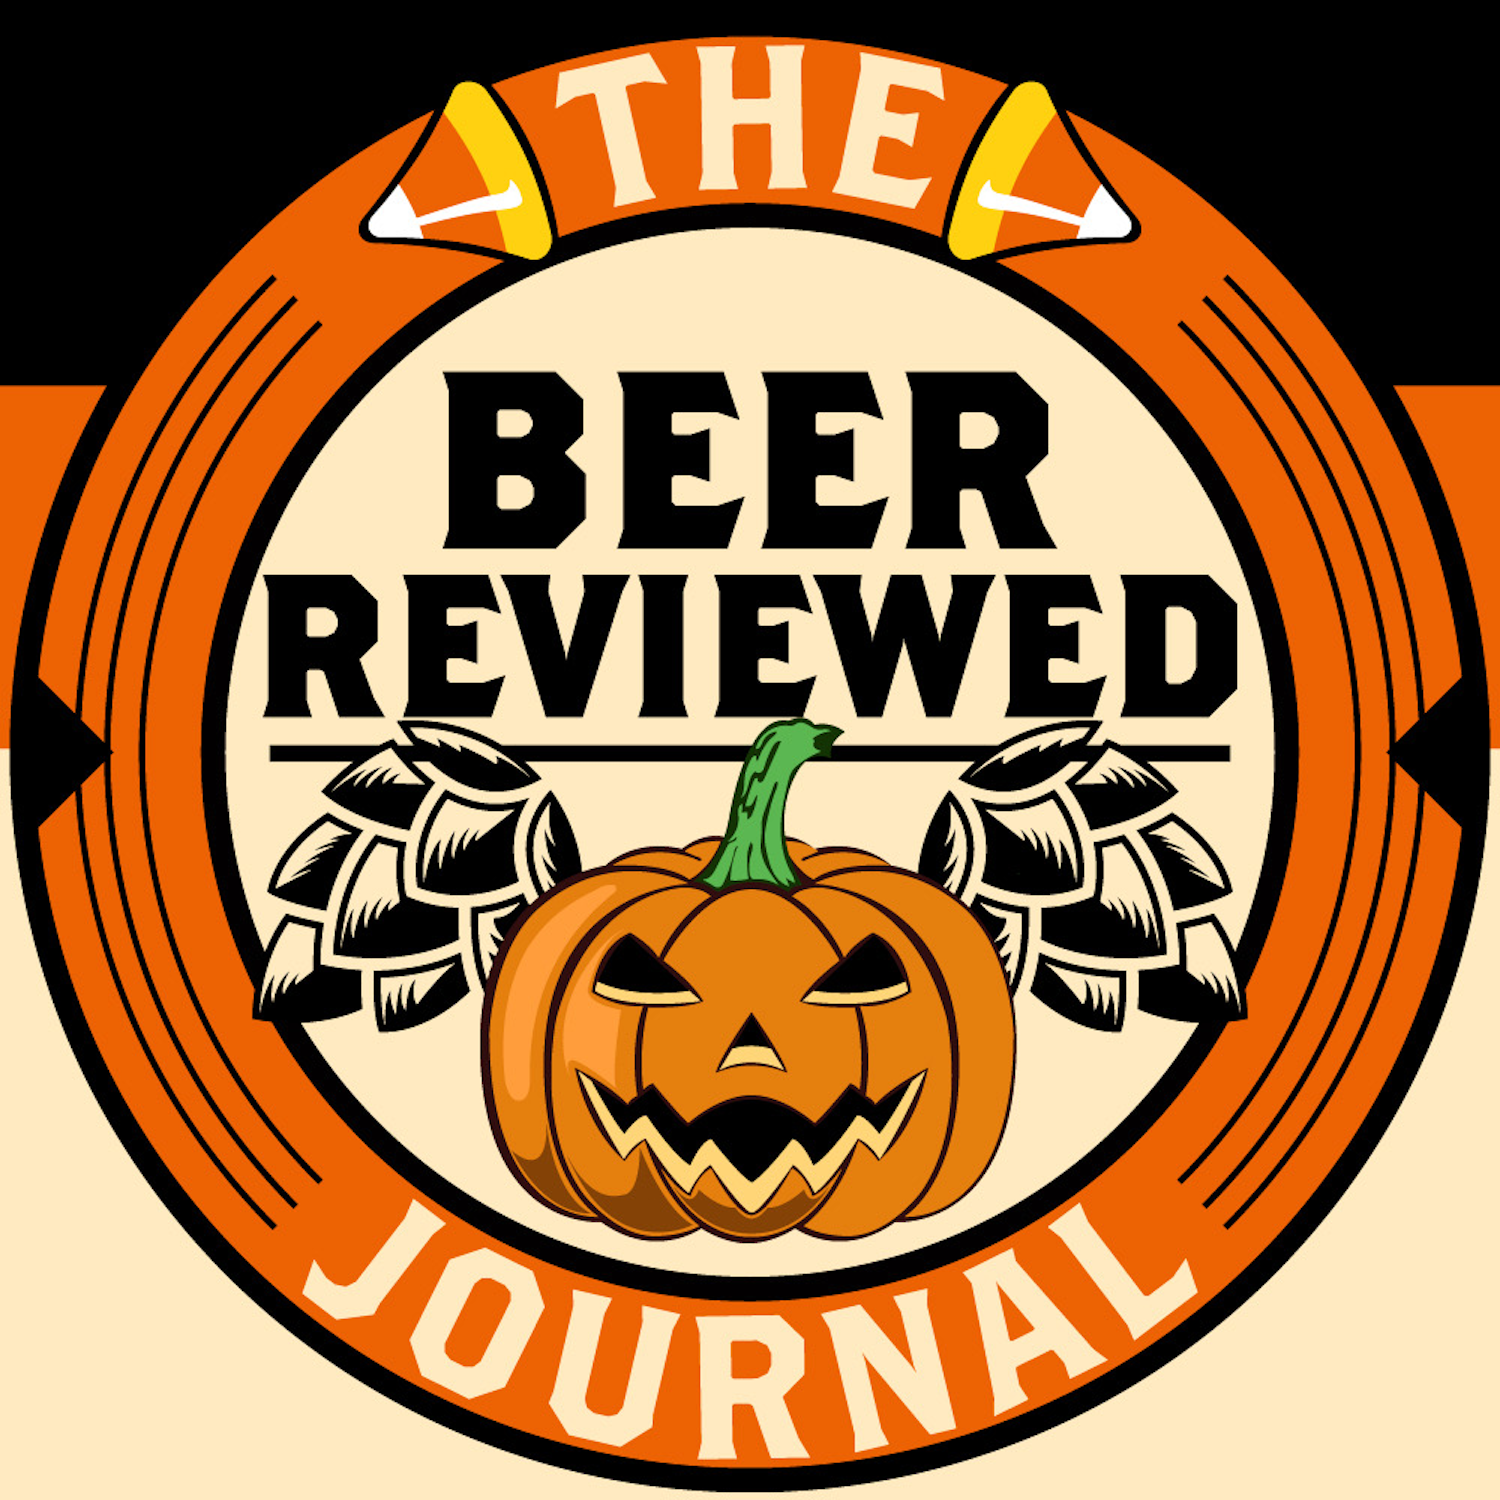 Artwork for podcast The Beer Reviewed Journal